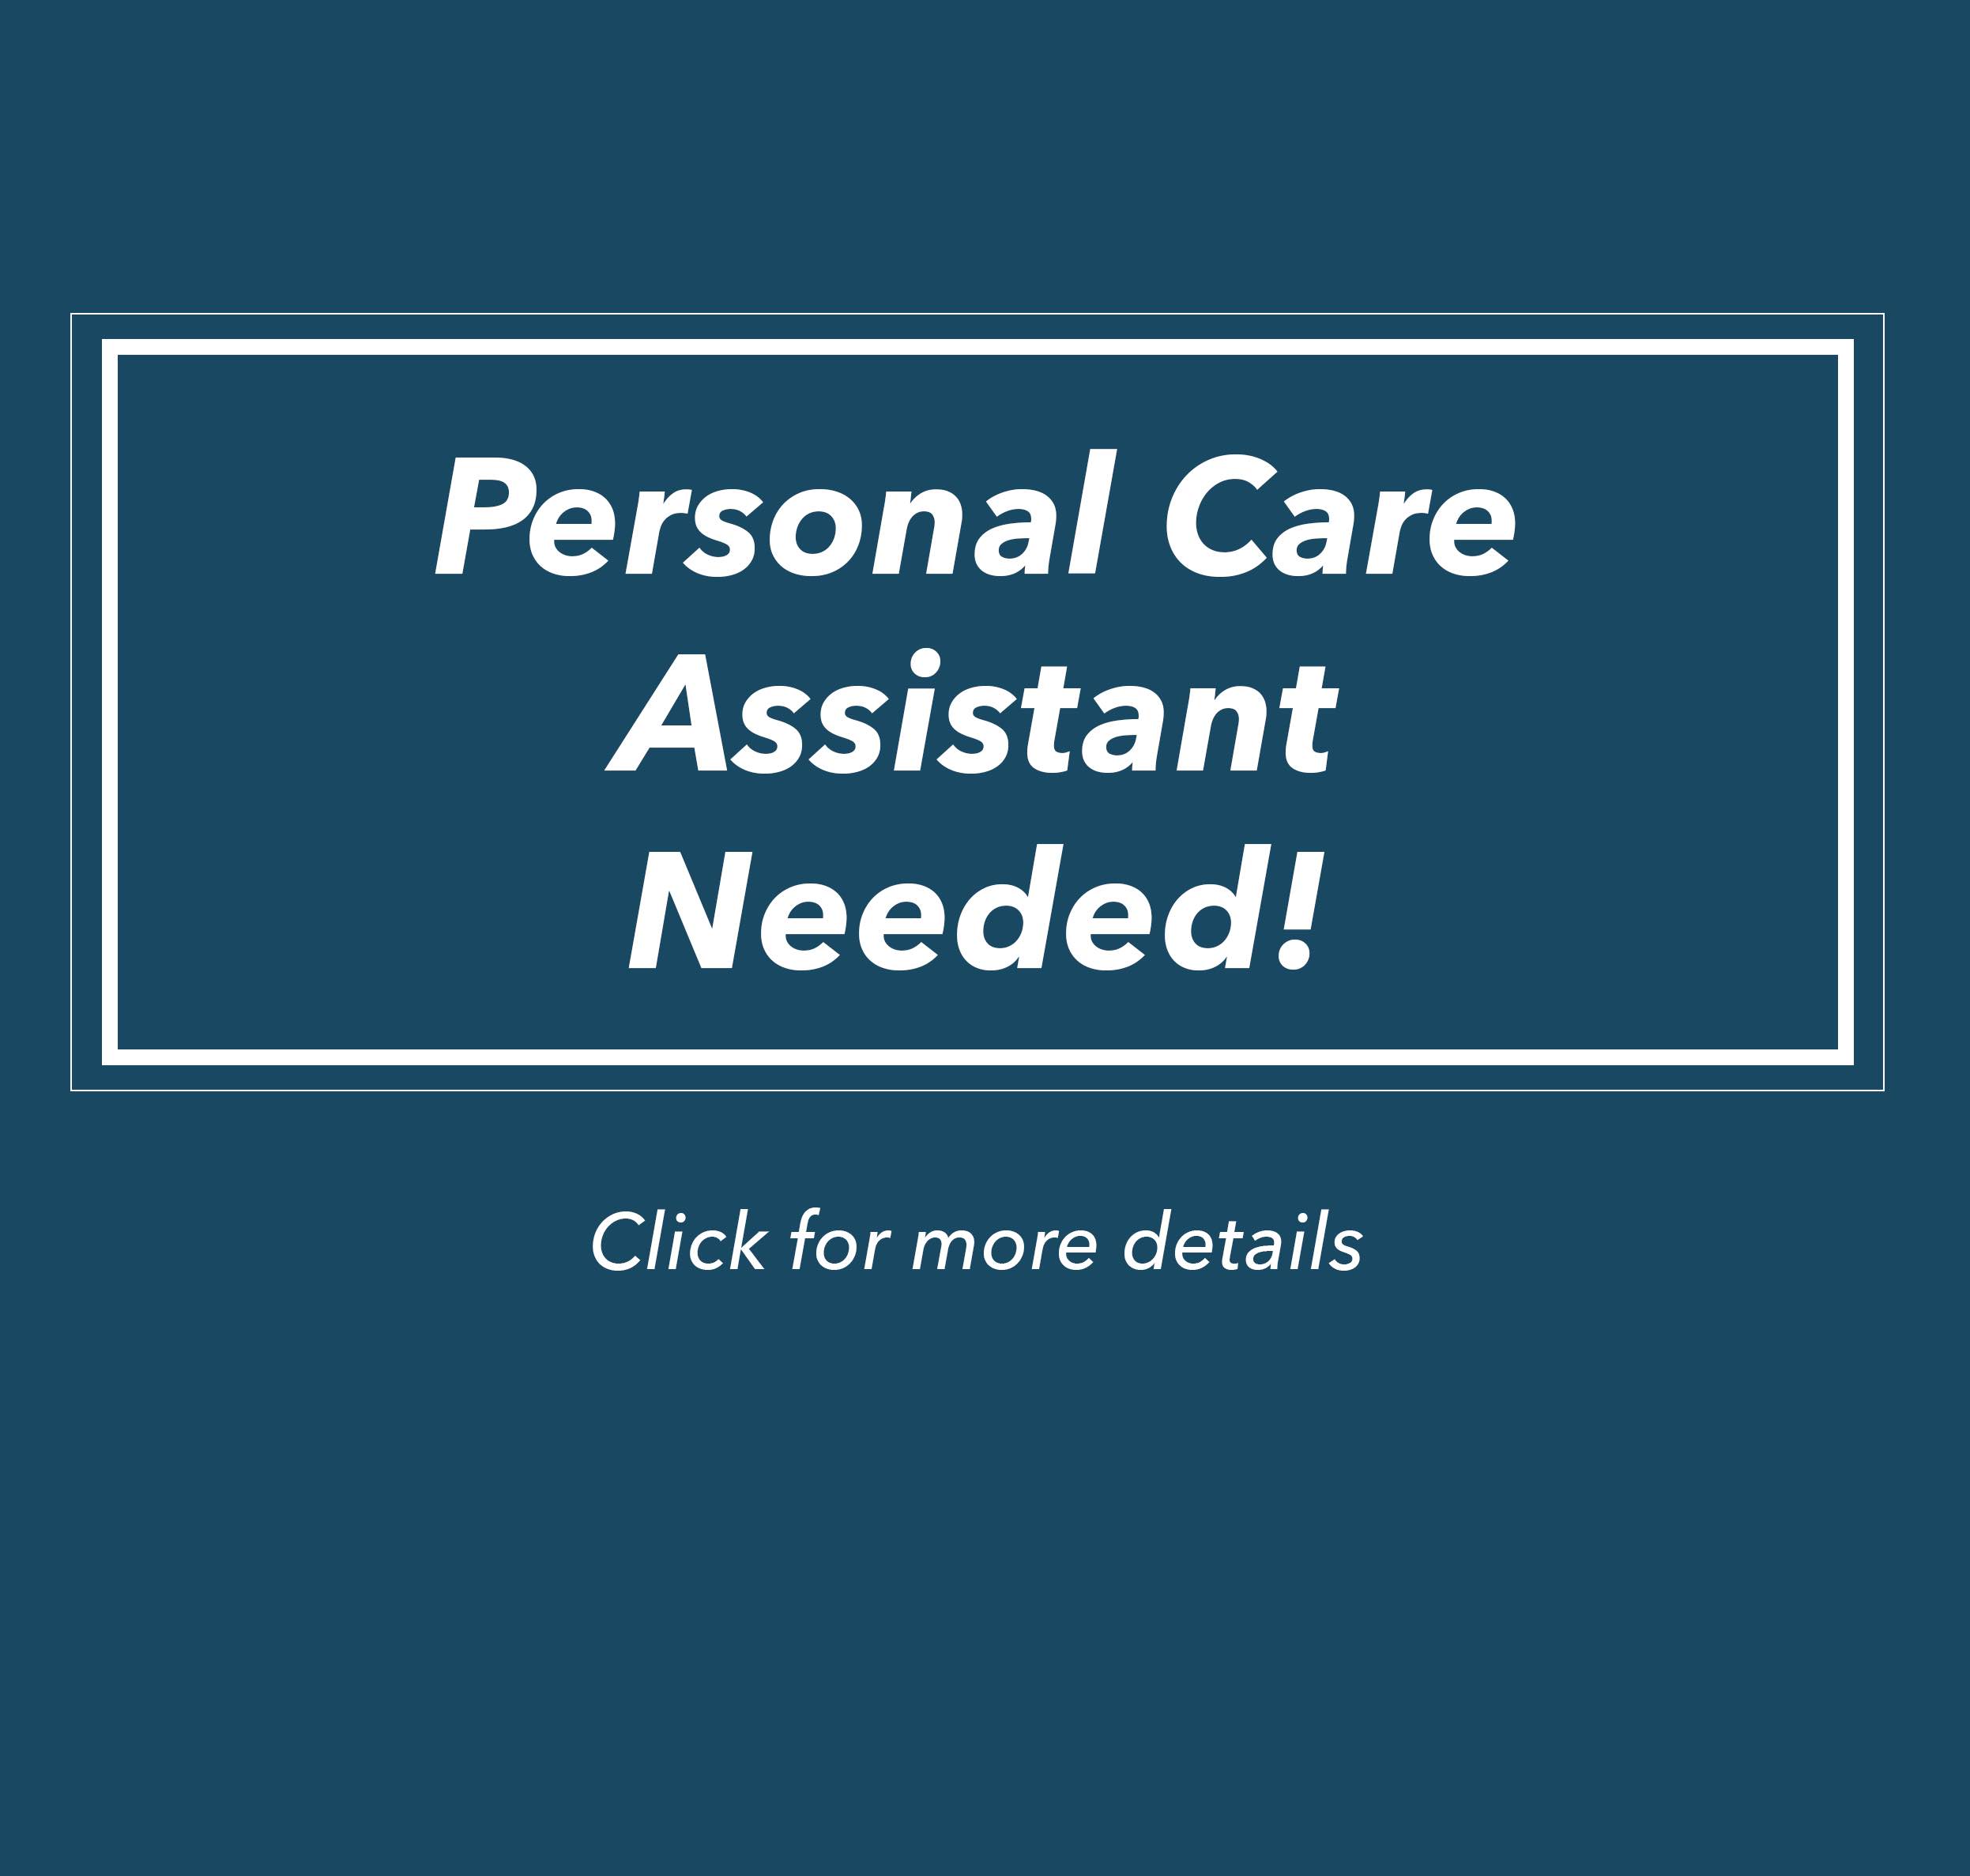 Personal Care Assistant Needed!